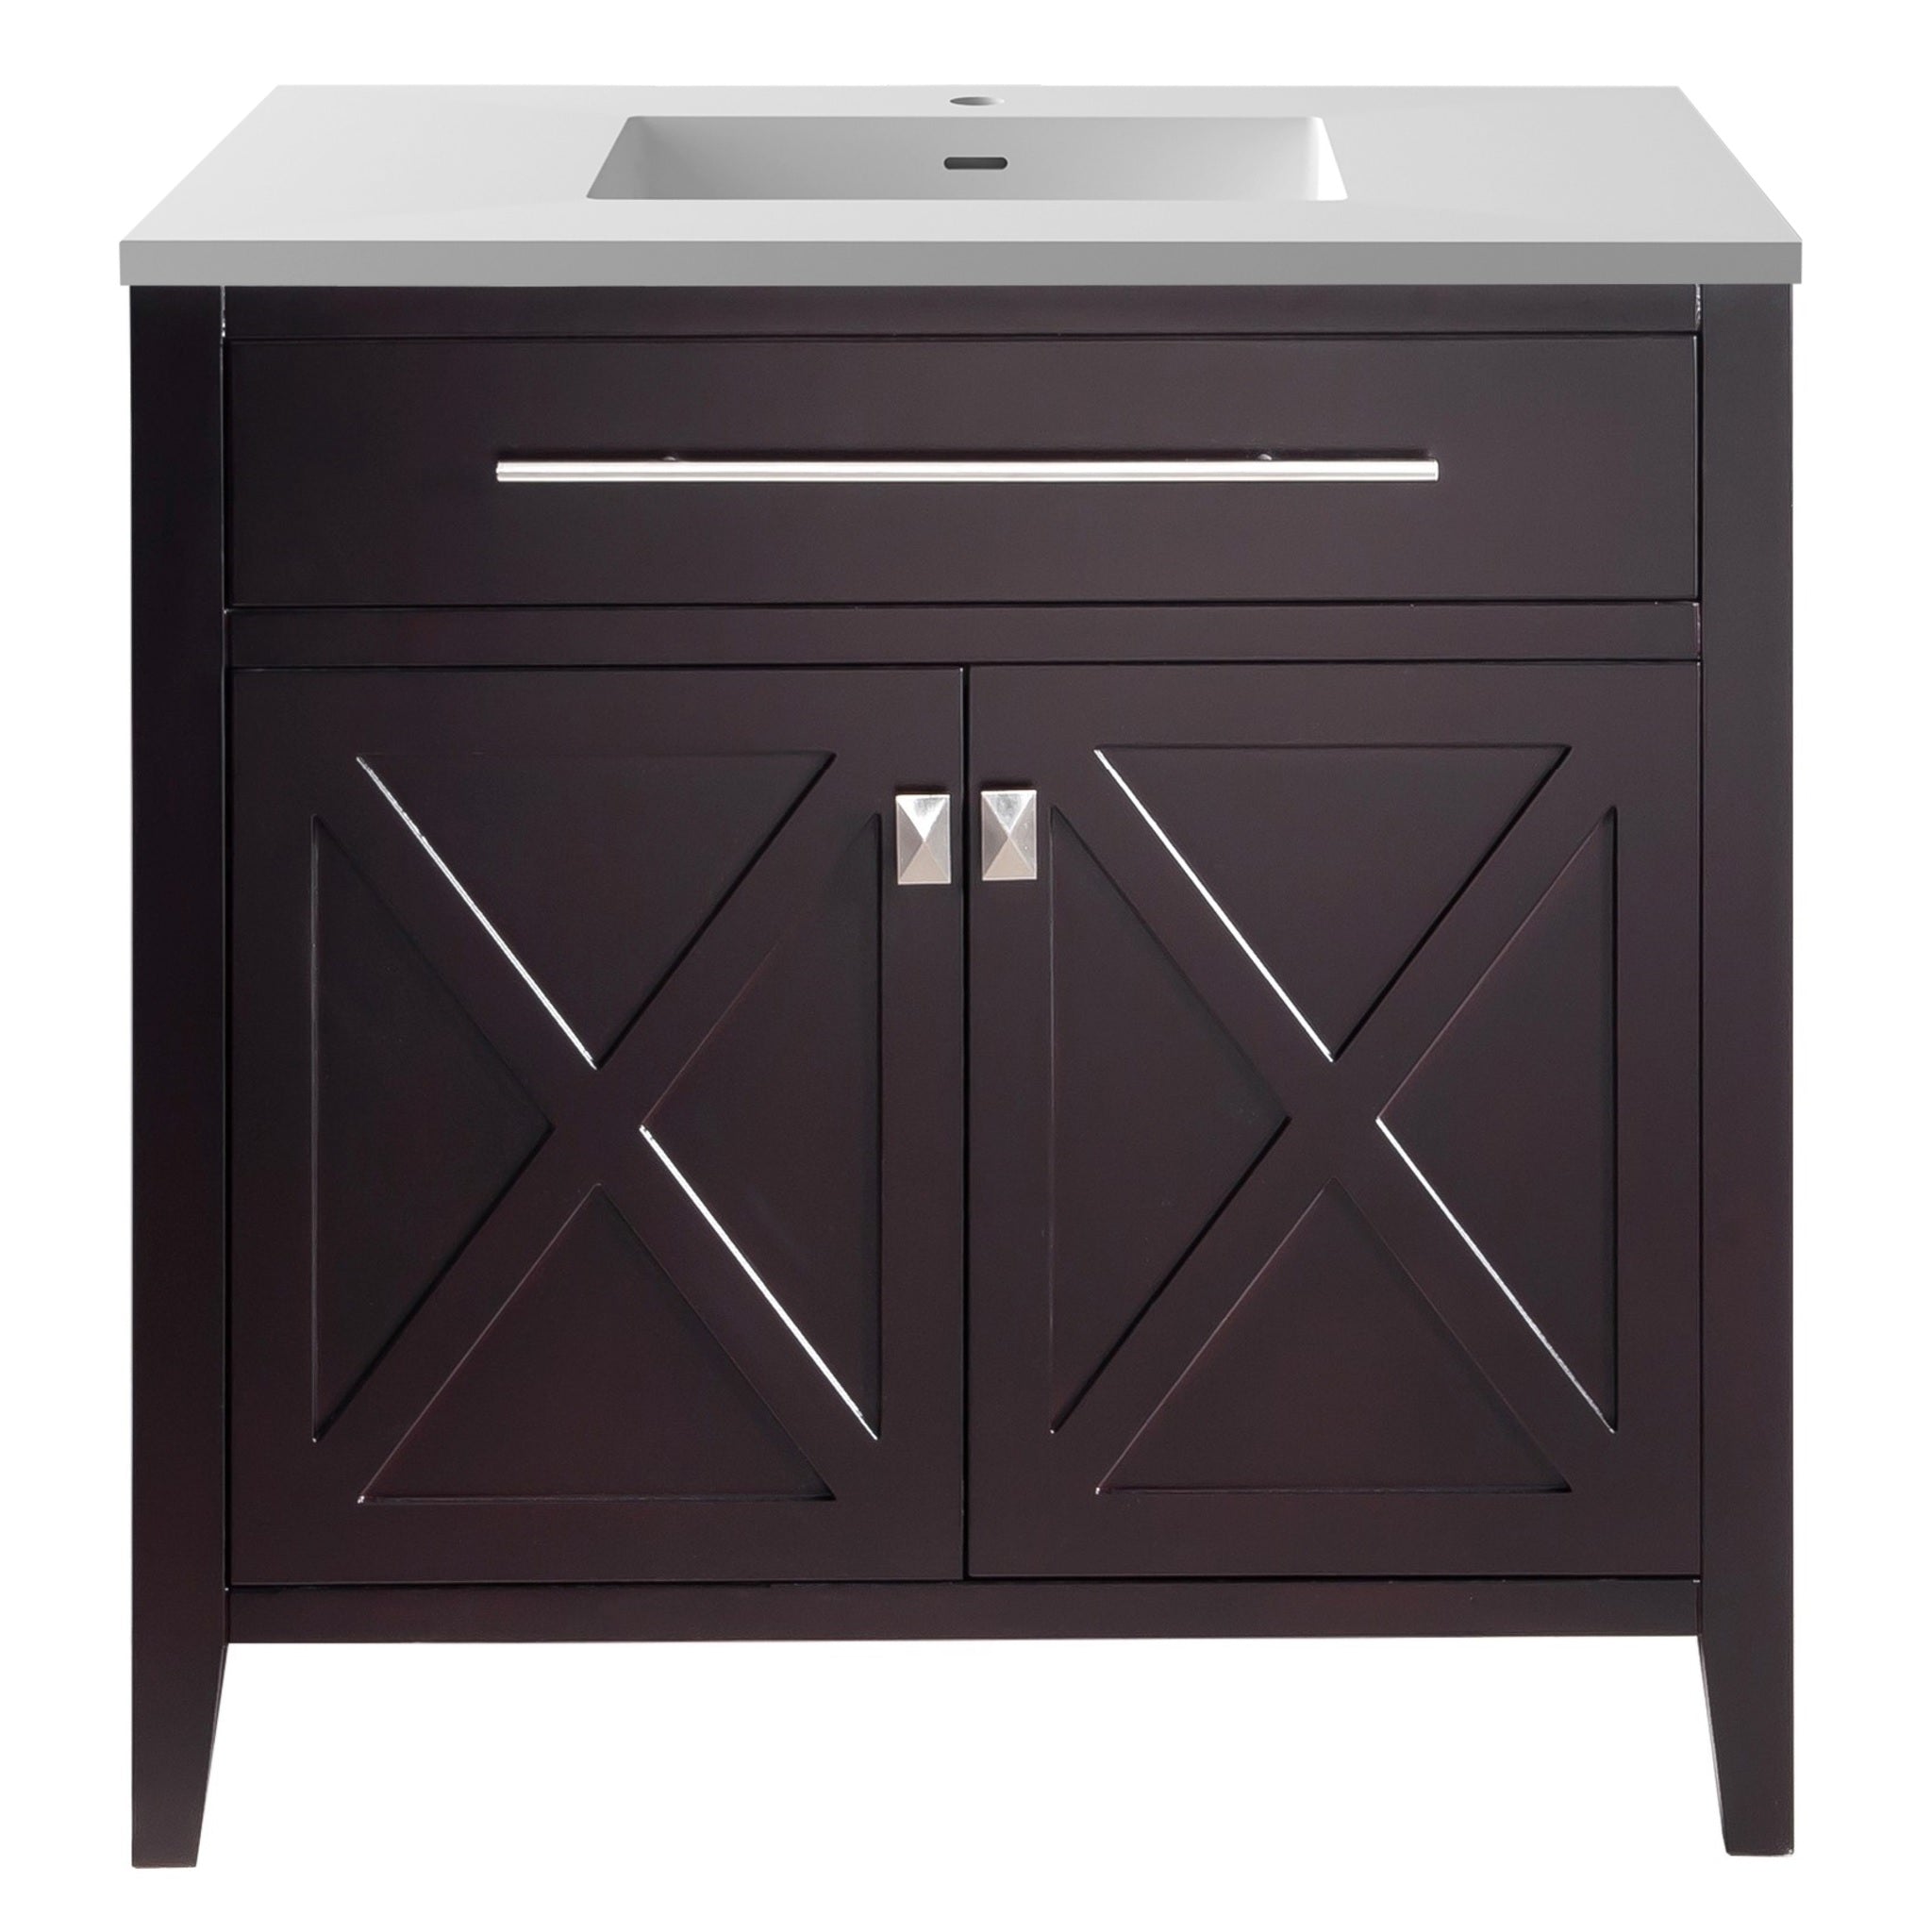 LAVIVA Wimbledon 313YG319-36B-MW 36" Single Bathroom Vanity in Brown with Matte White VIVA Stone Surface, Integrated Sink, Front View